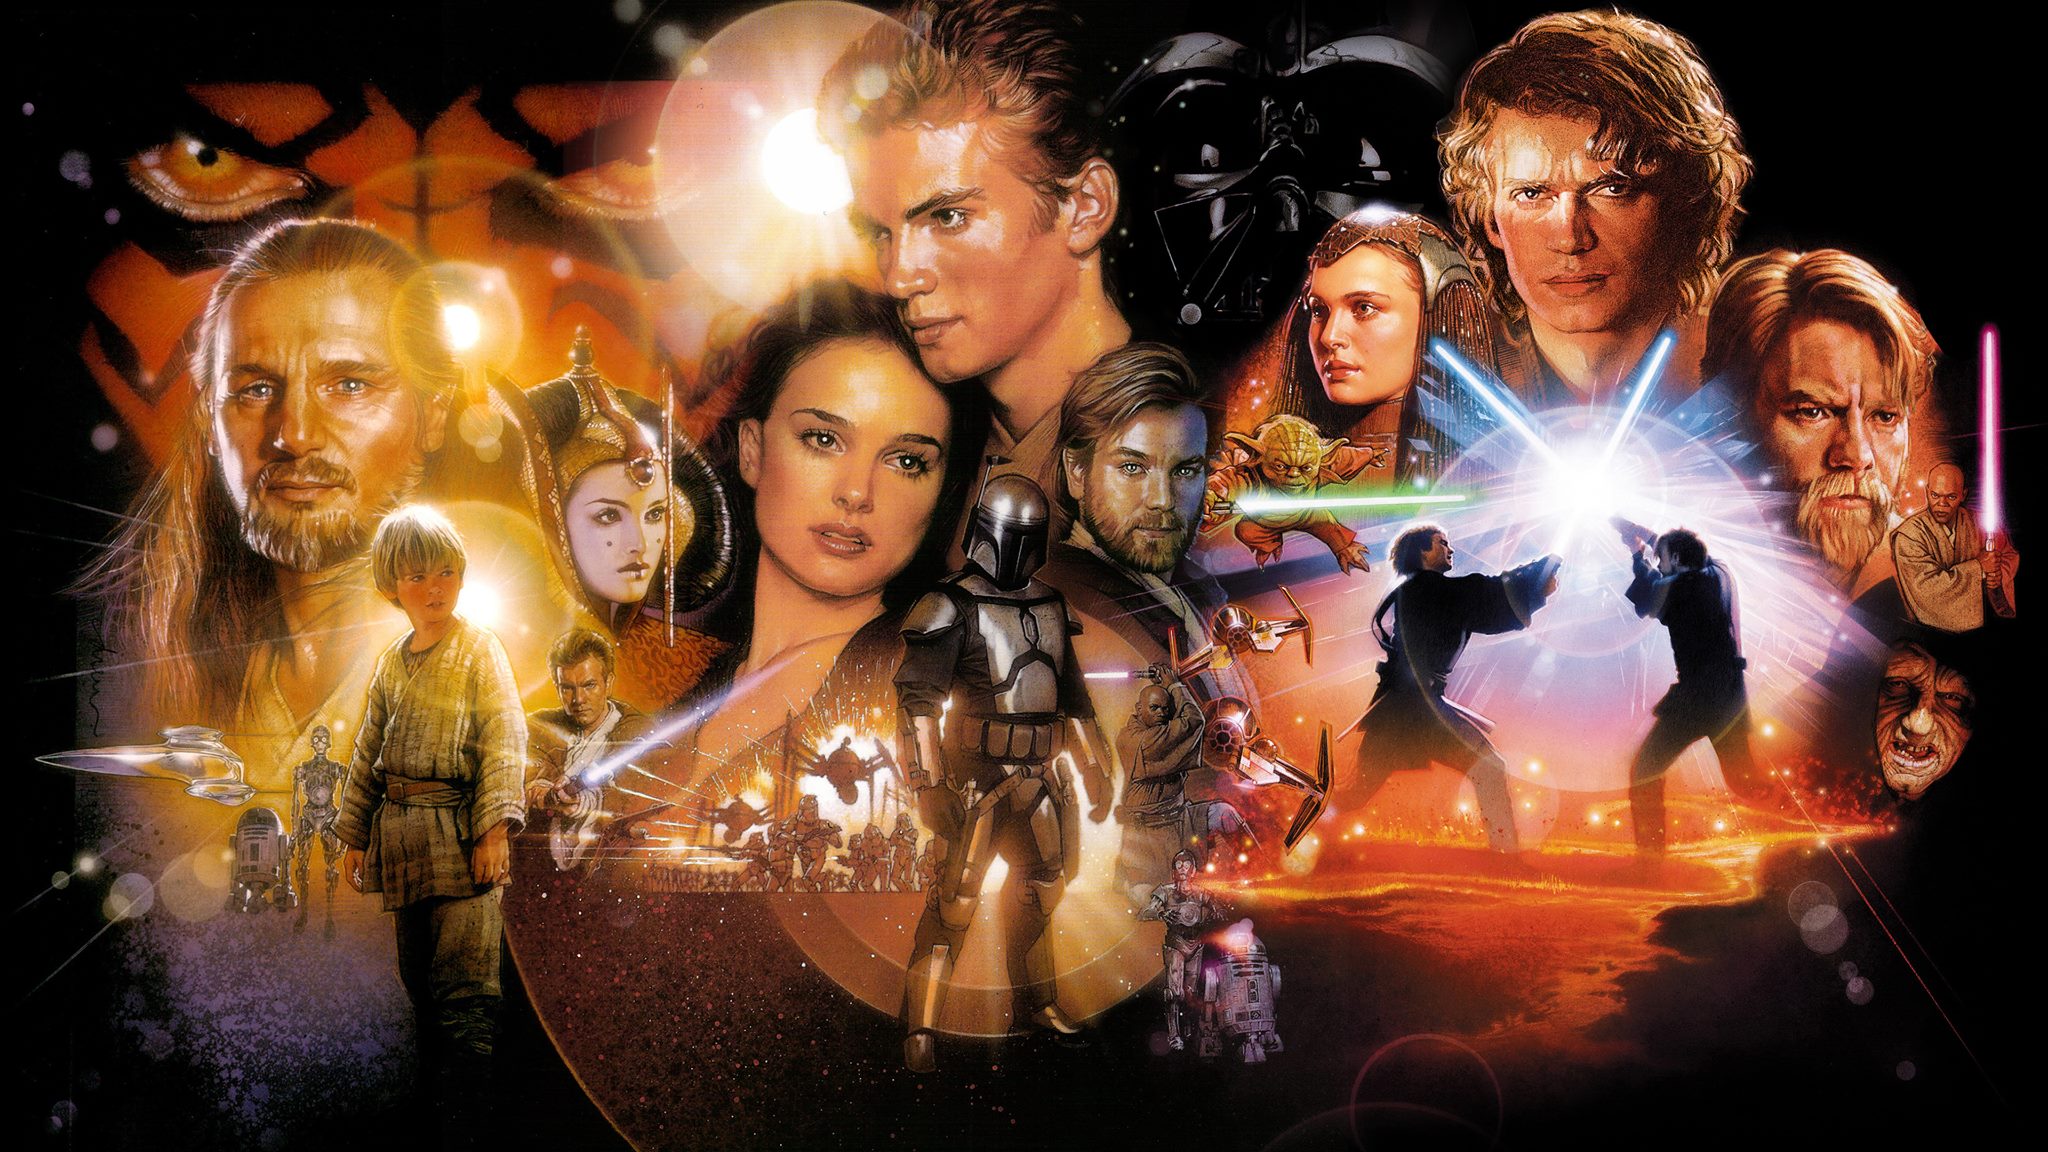 Looking Back On Star Wars' Prequel Trilogy ON FILM